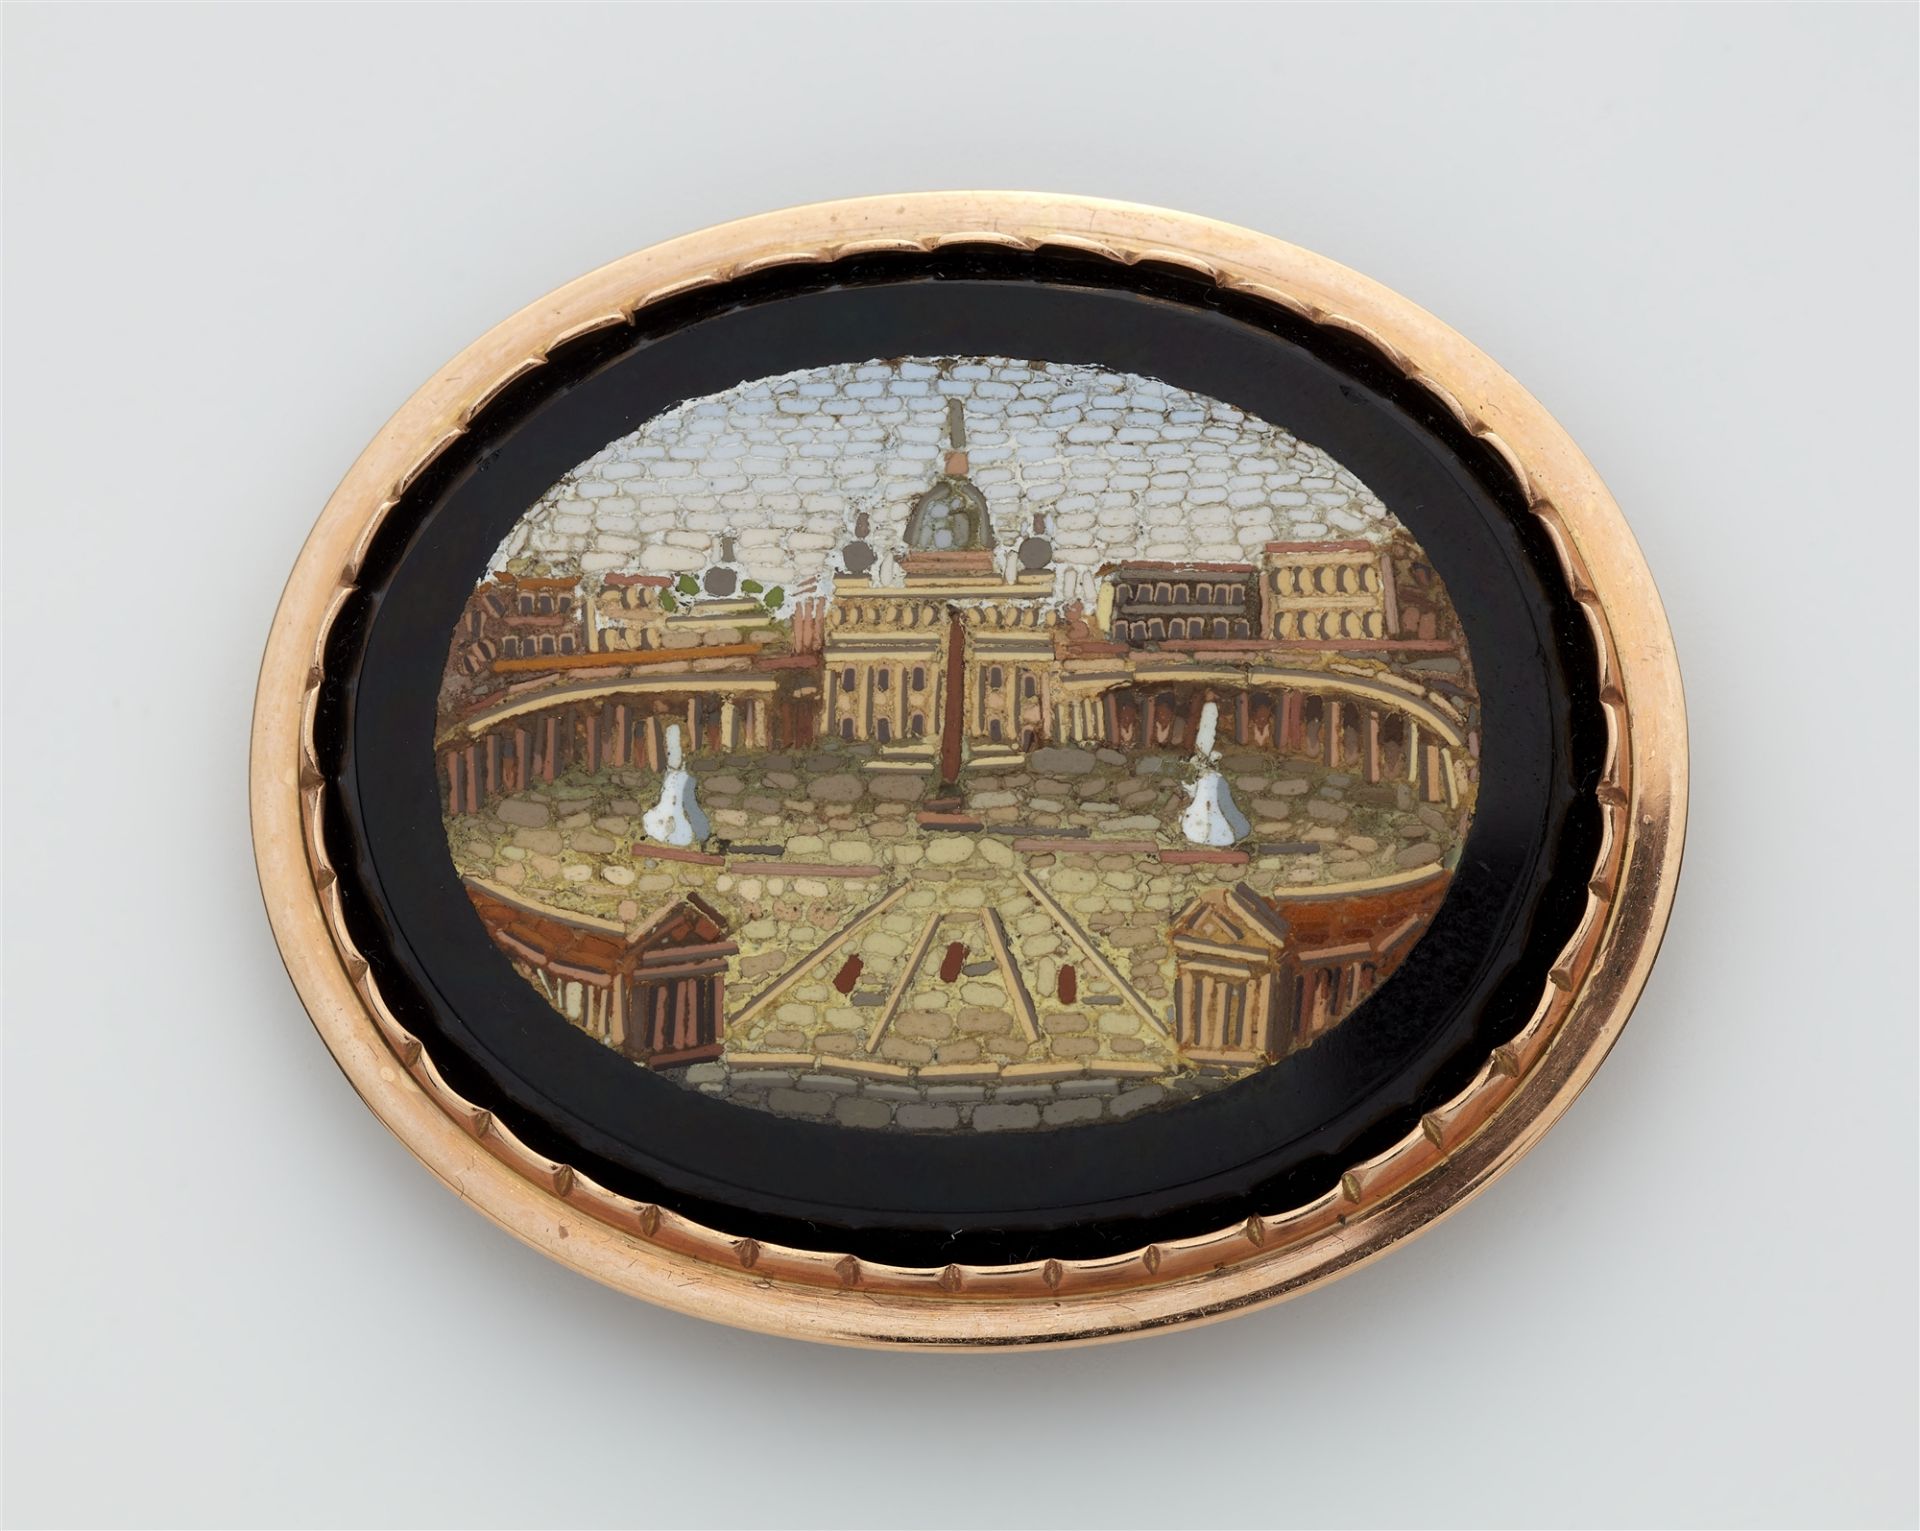 A 14k gold and Roman micromosaic brooch depicting the St. Peters Square in Rome. - Image 2 of 3